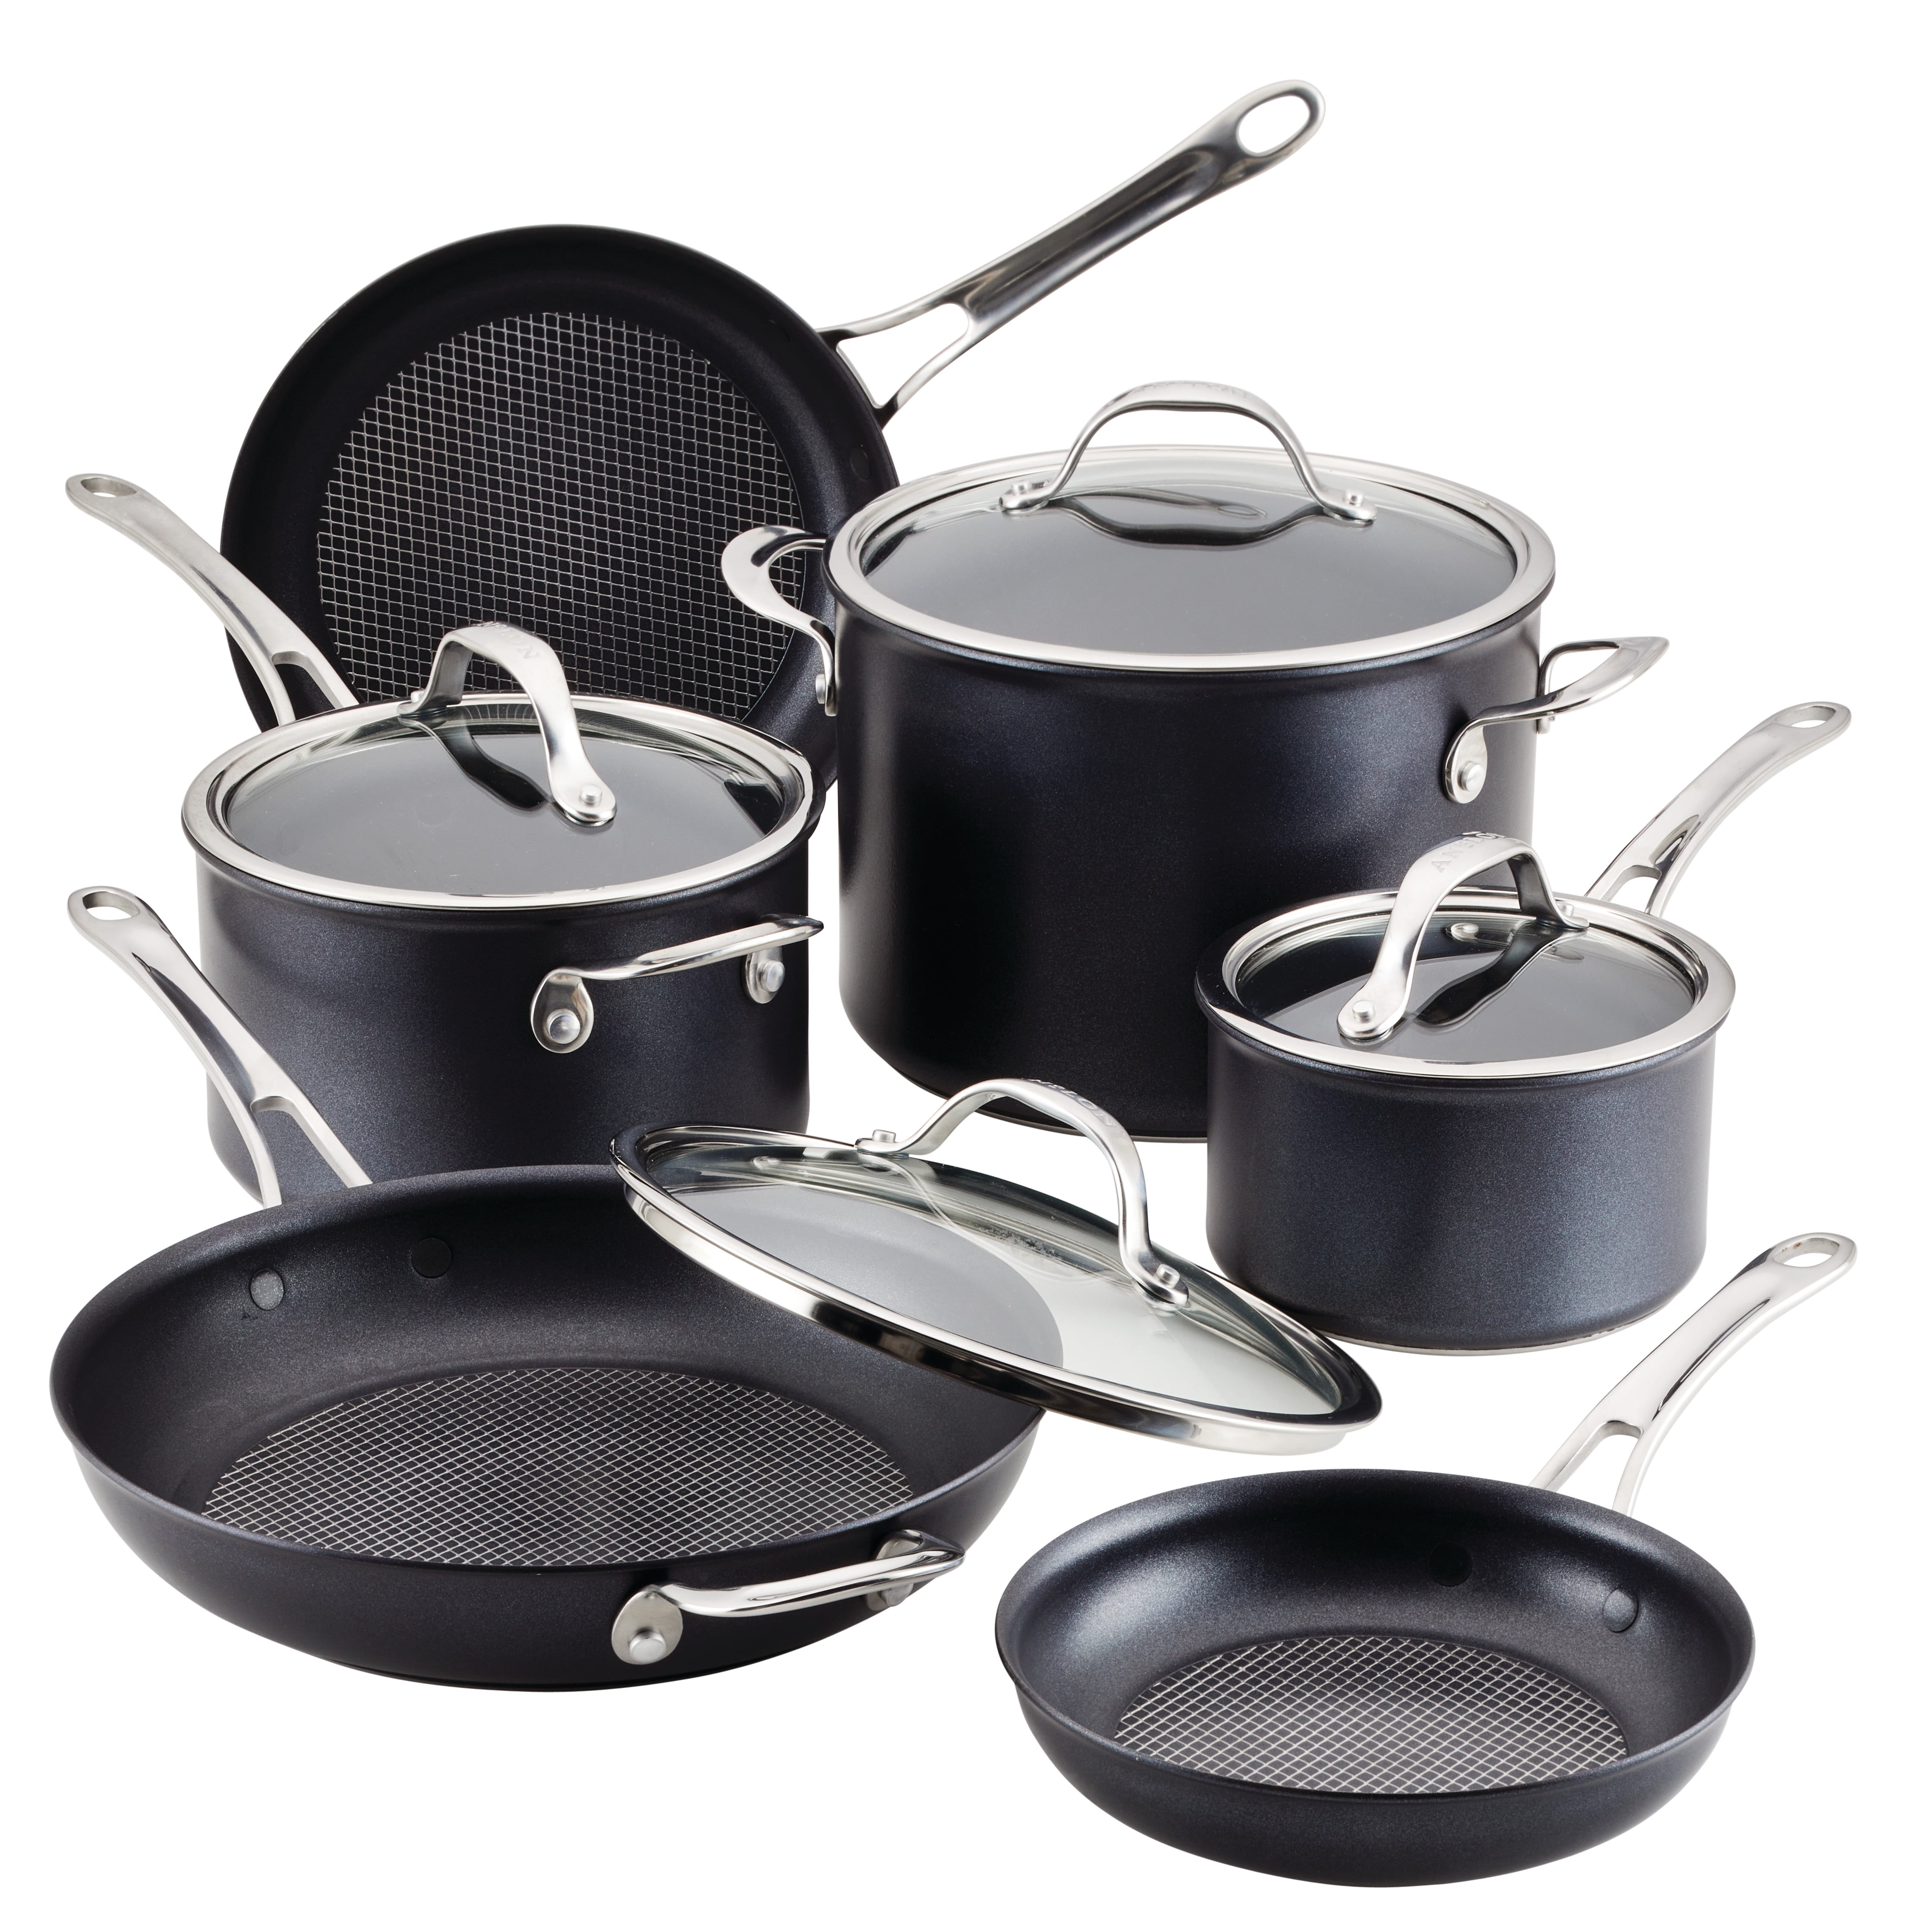 Williams-Sonoma: It's here: NEW Anolon X Cookware